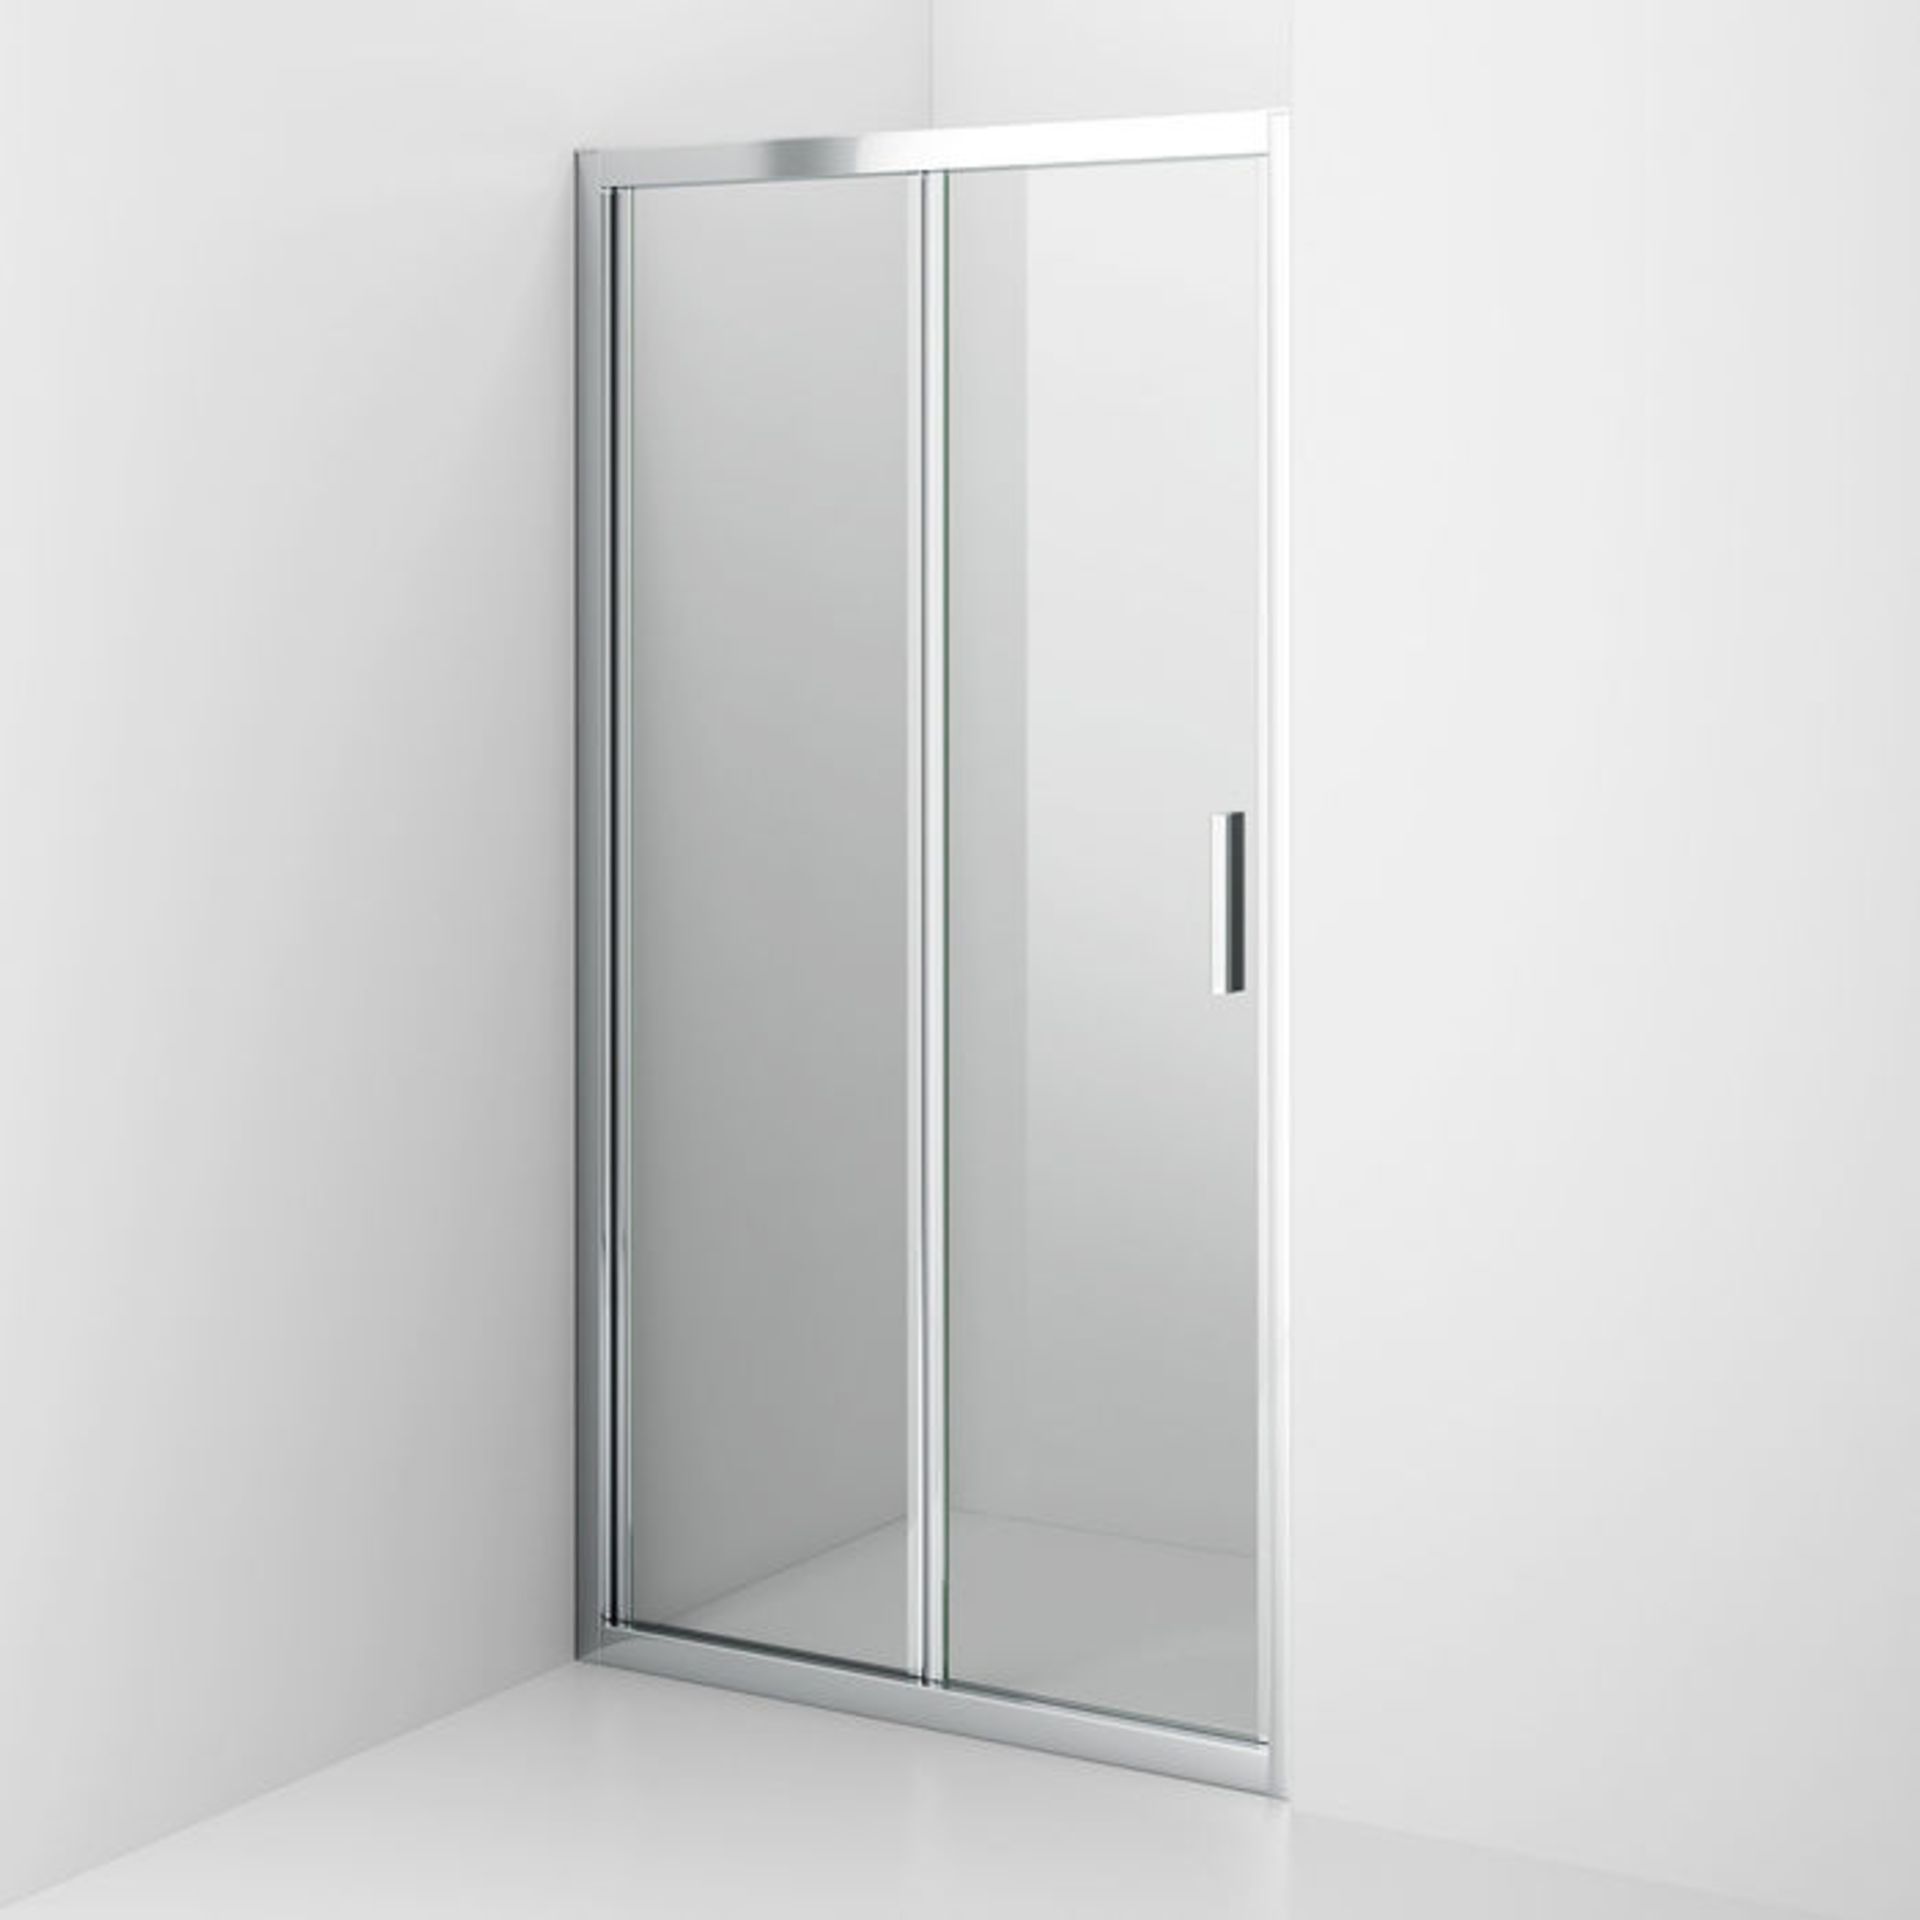 (ZA215) 1000mm - 6mm - Elements EasyClean Bifold Shower Door. RRP £239.99. 6mm Safety Glass - - Image 5 of 5